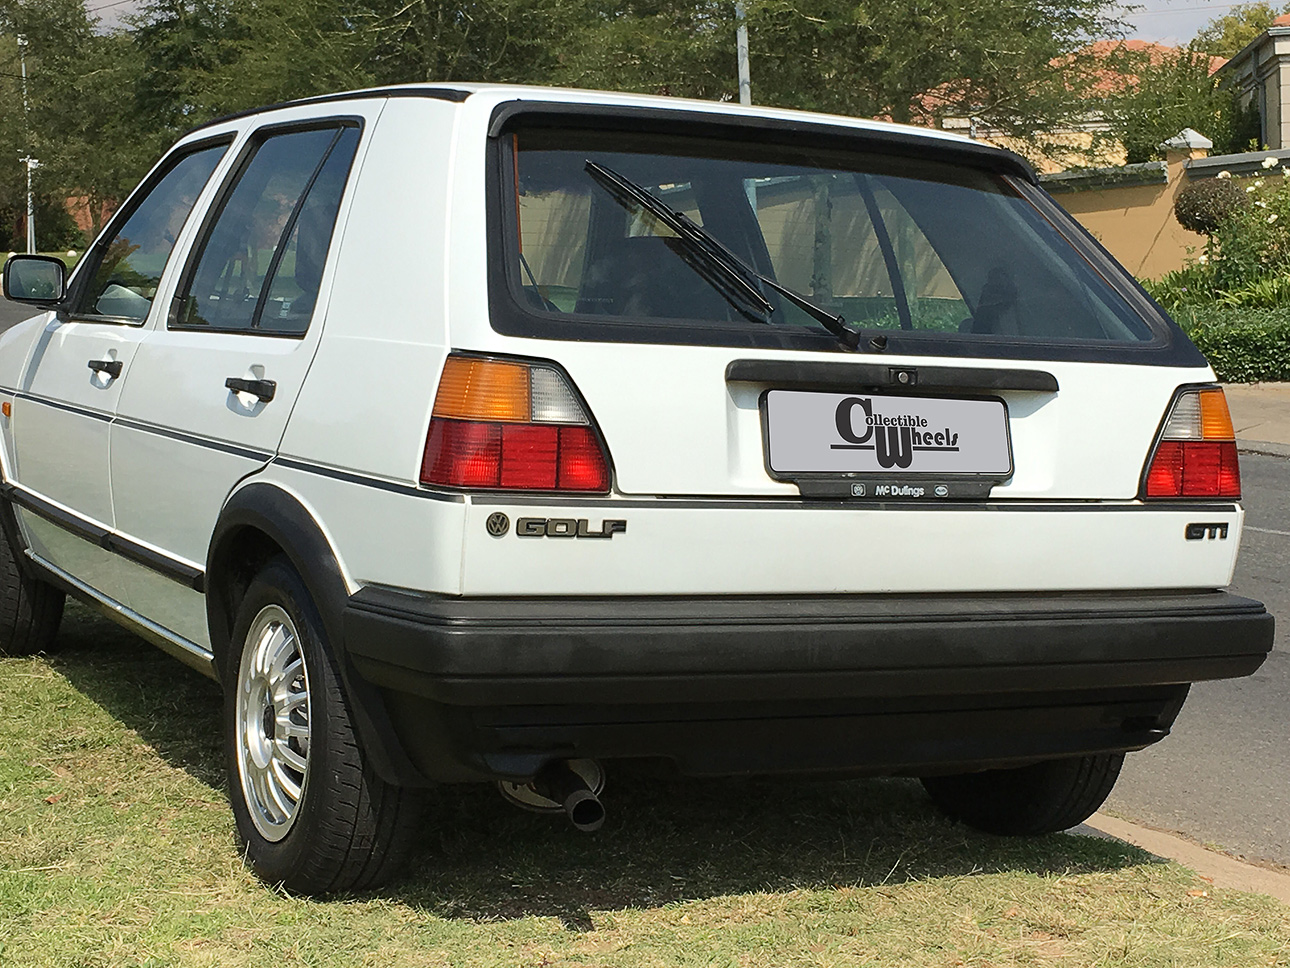 Golf GTI MKII 1989 Model — Collectible Wheels